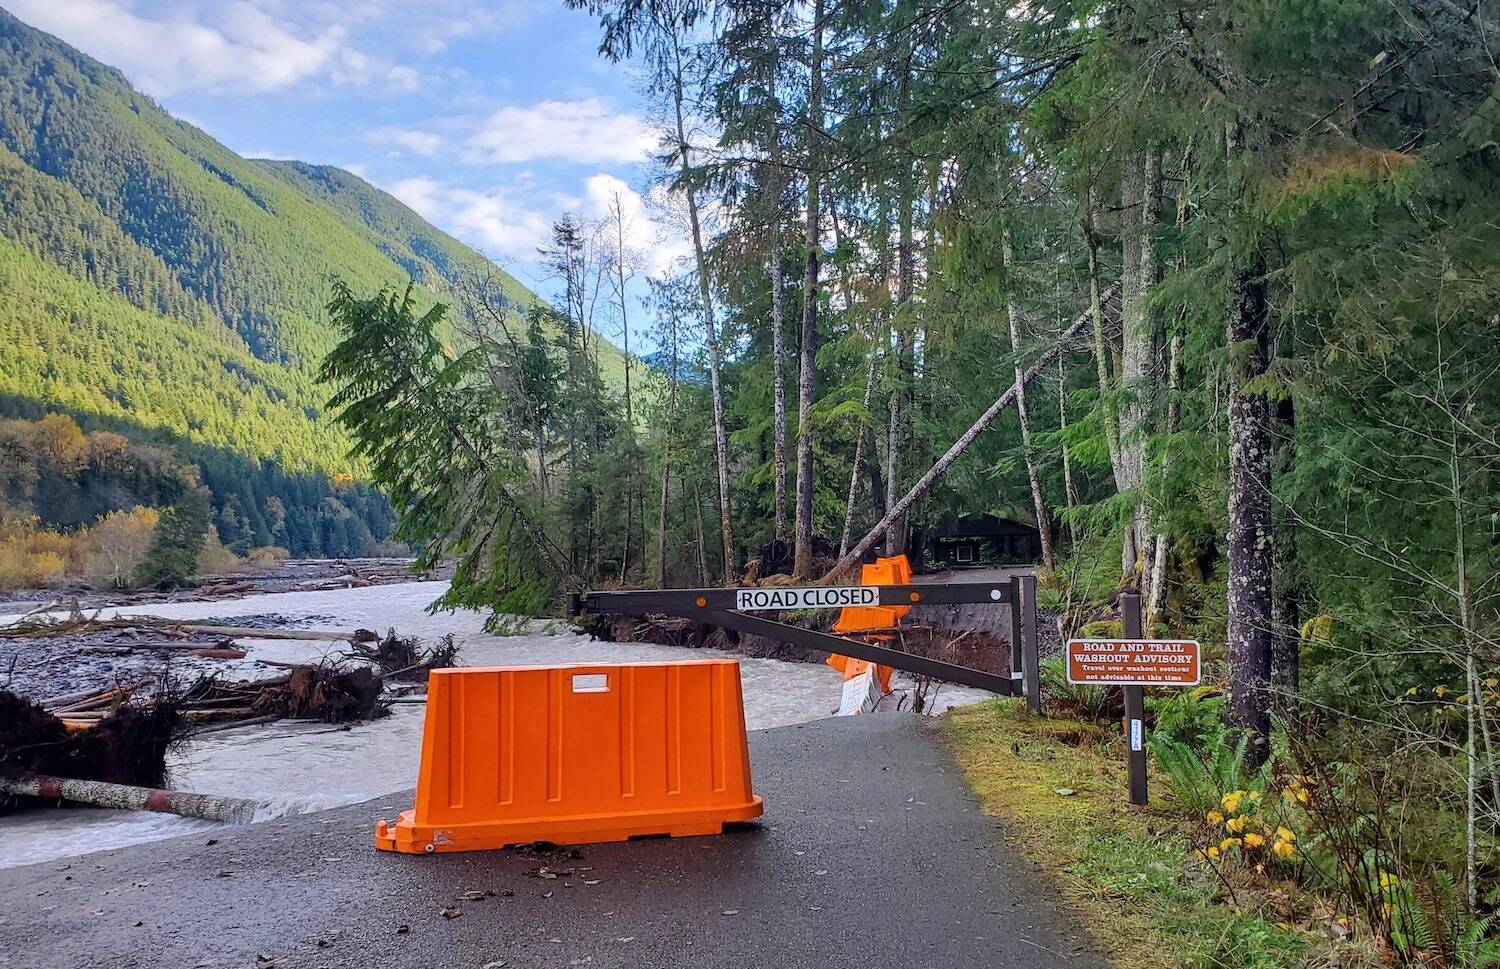 This photo, shared by Mount Rainier National Park, shows the point of failure on Carbon River Road that is preventing access to the Carbon River Area.